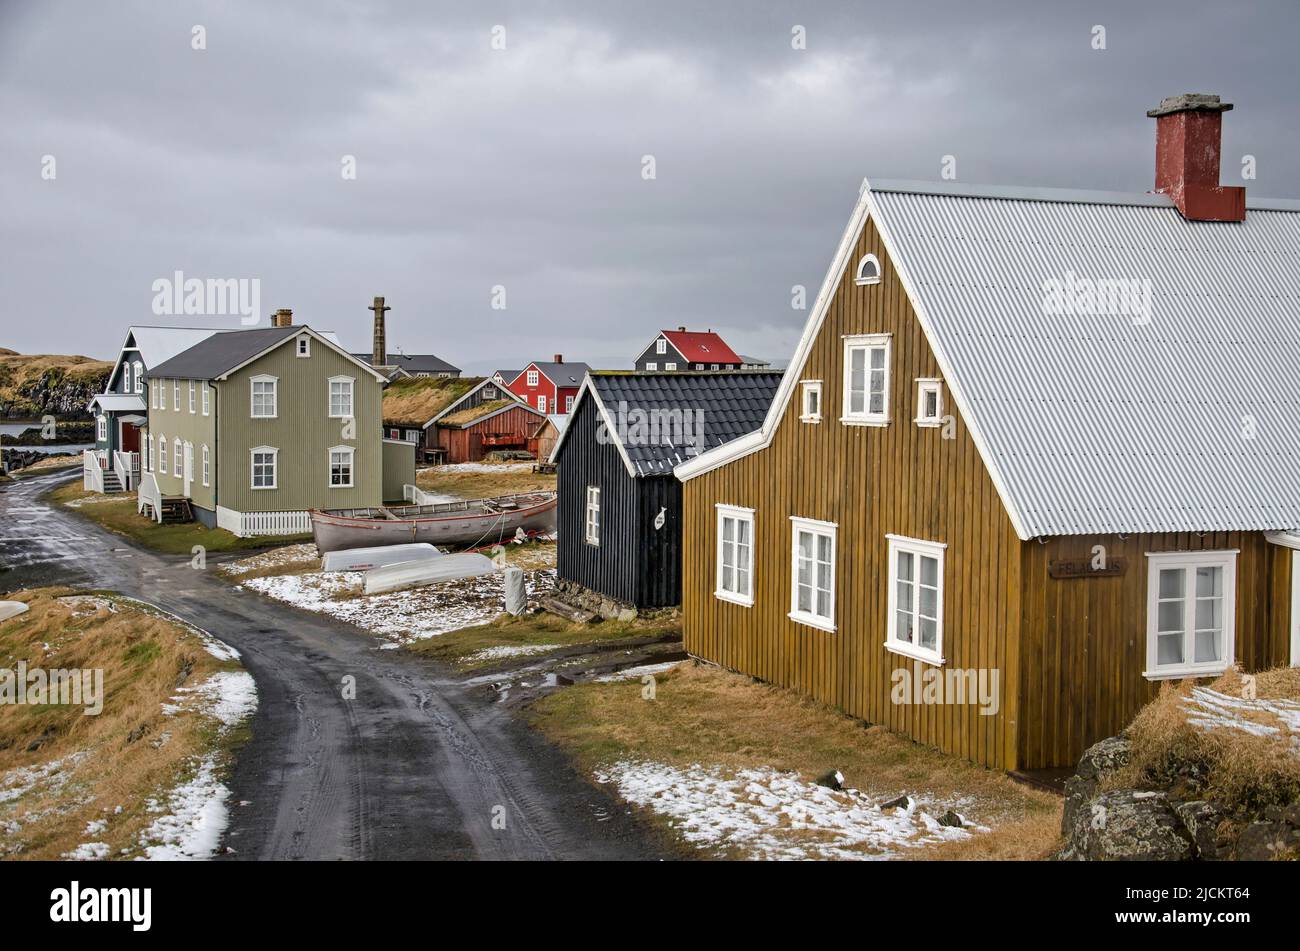 Flatey, Iceland, May 5, 2022: traditional houses made of wood and corrugated metal in the only village on the island Stock Photo